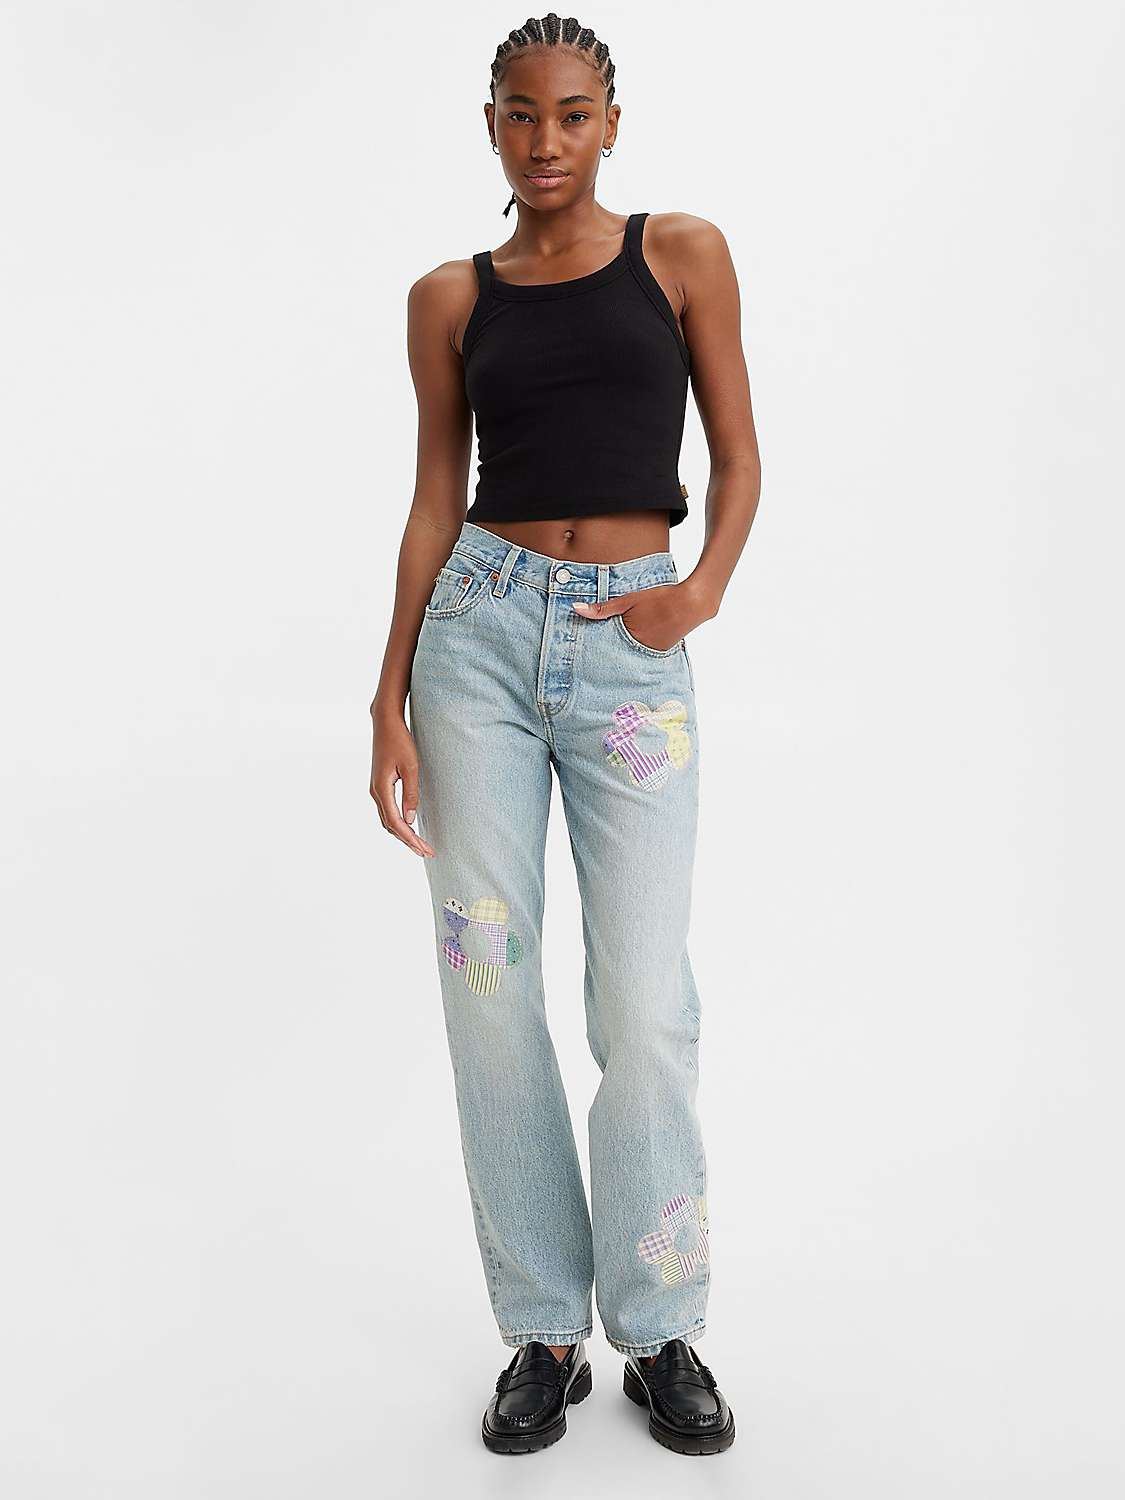 Levi's 501 Floral Patchwork Jeans, Fresh As A Daisy at John Lewis ...